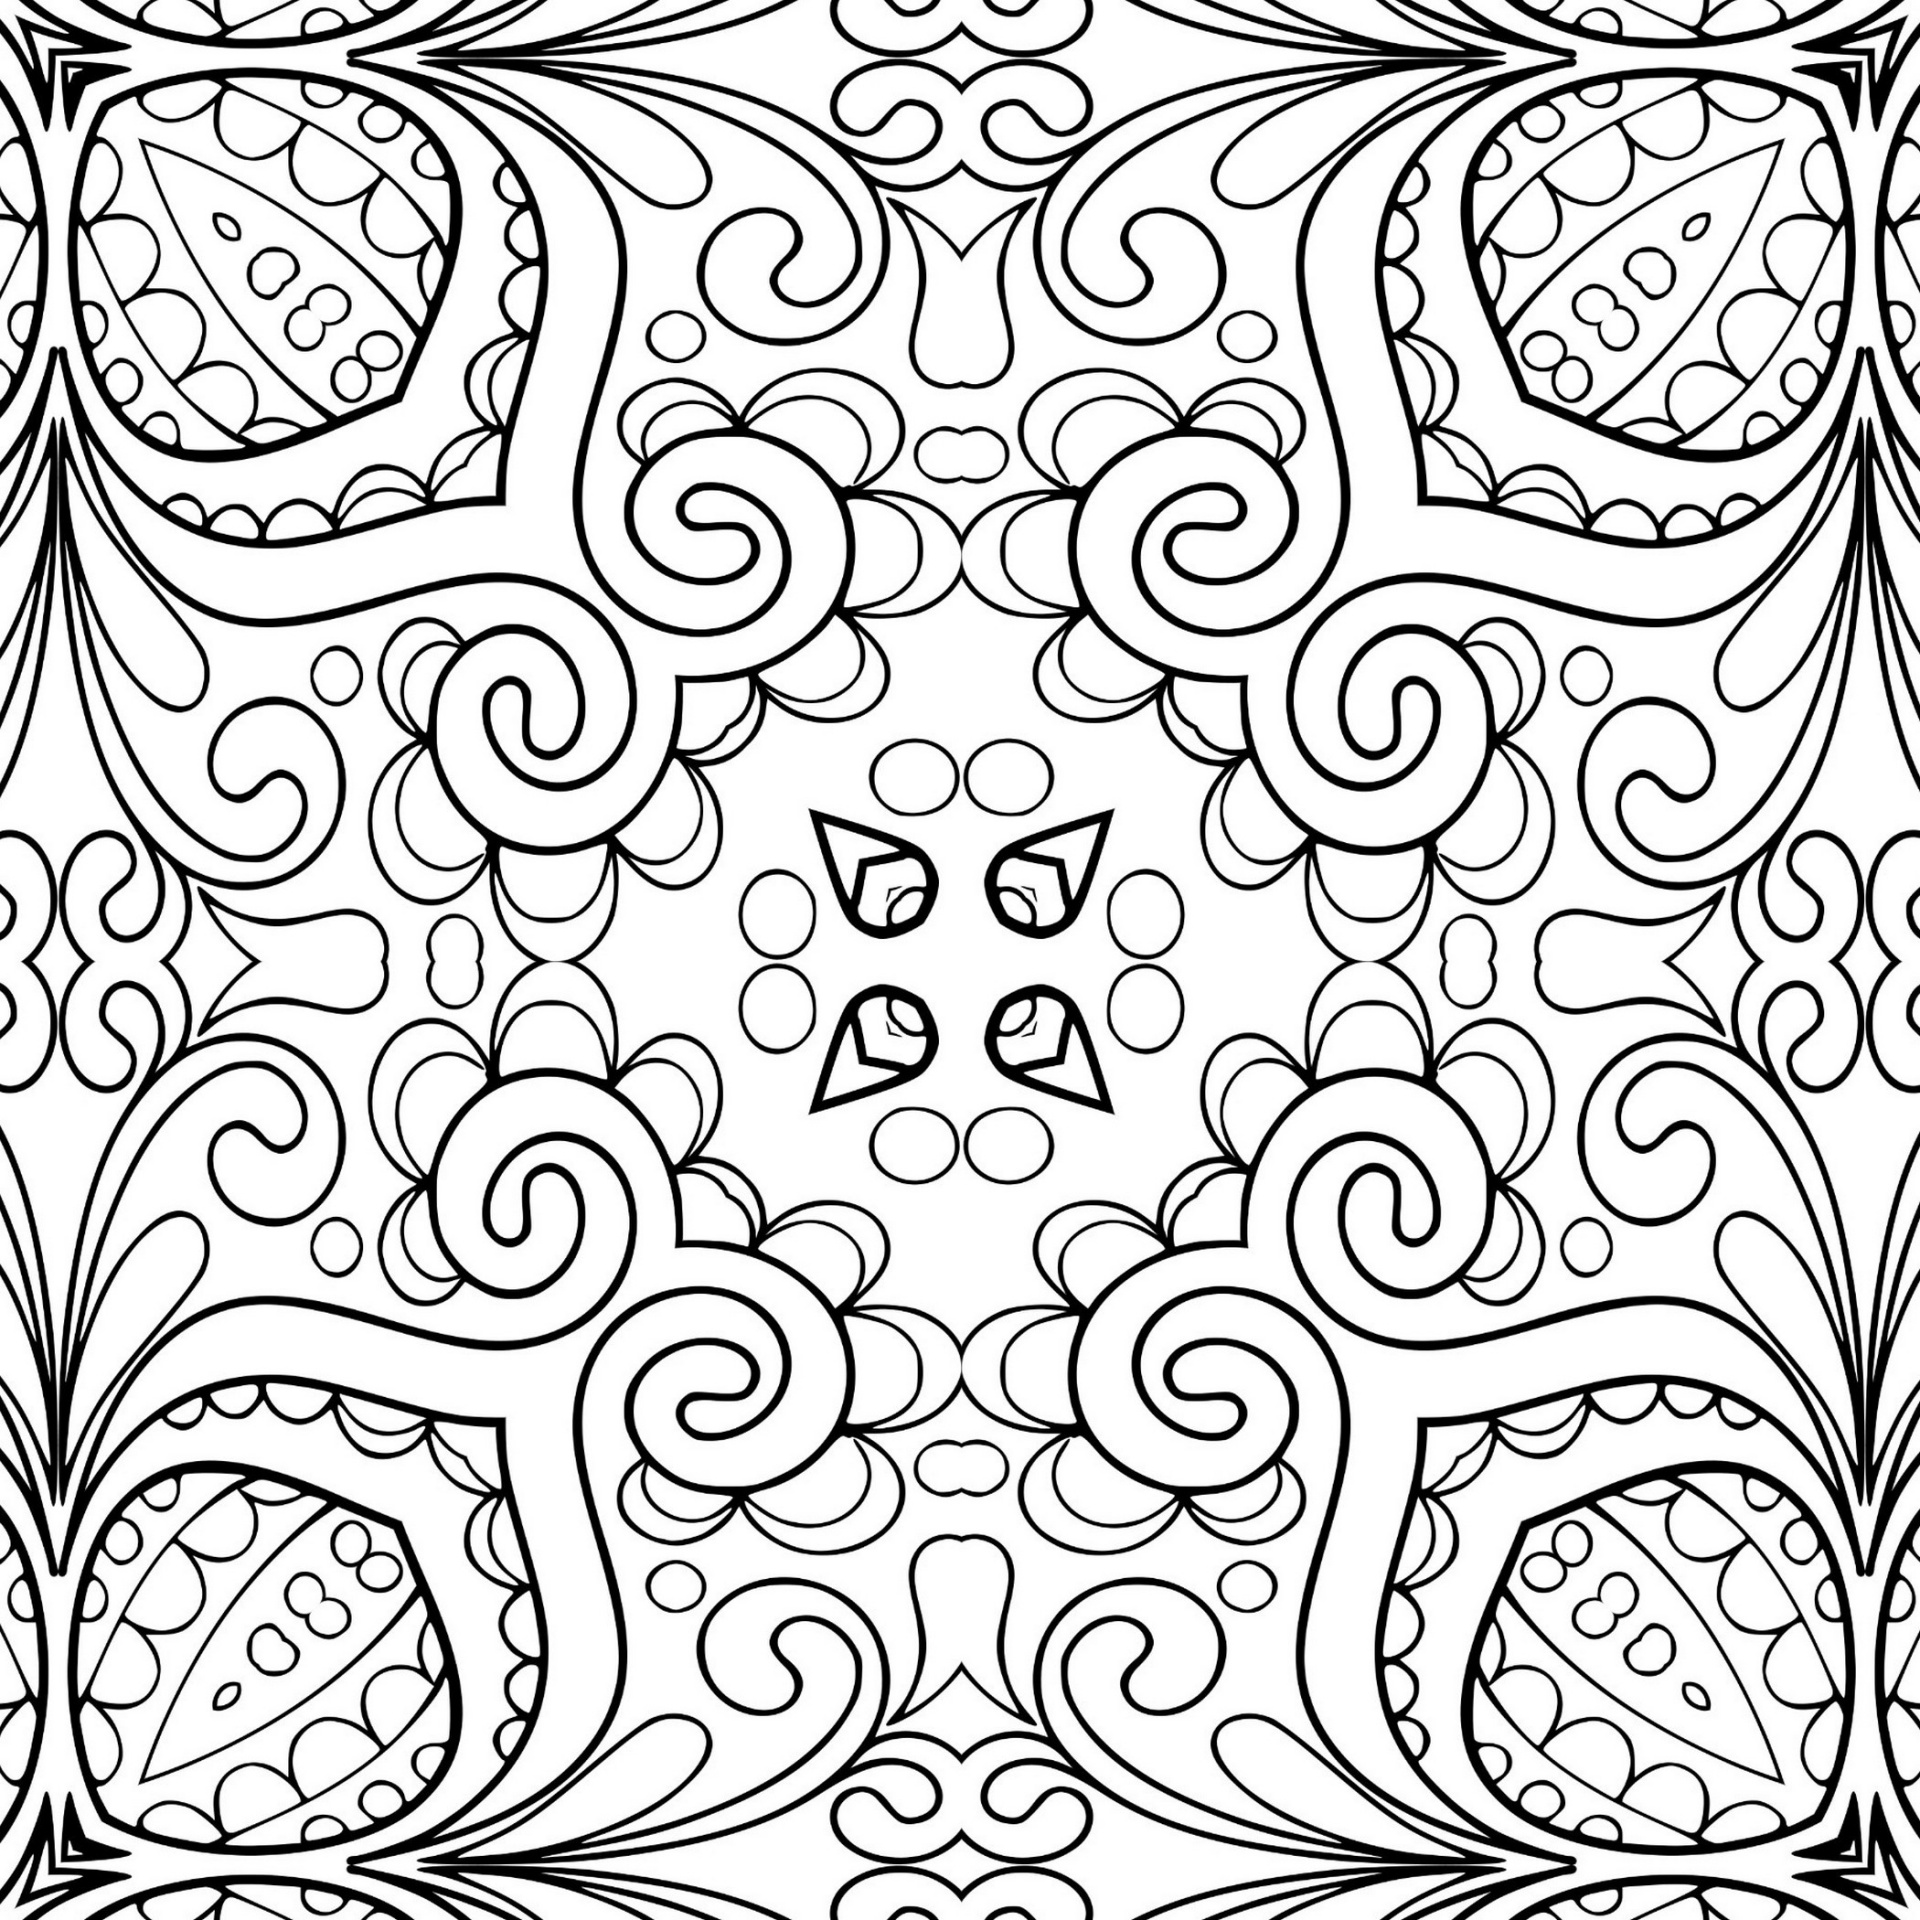  Coloring Page 28 Free Stock Photo Public Domain Pictures